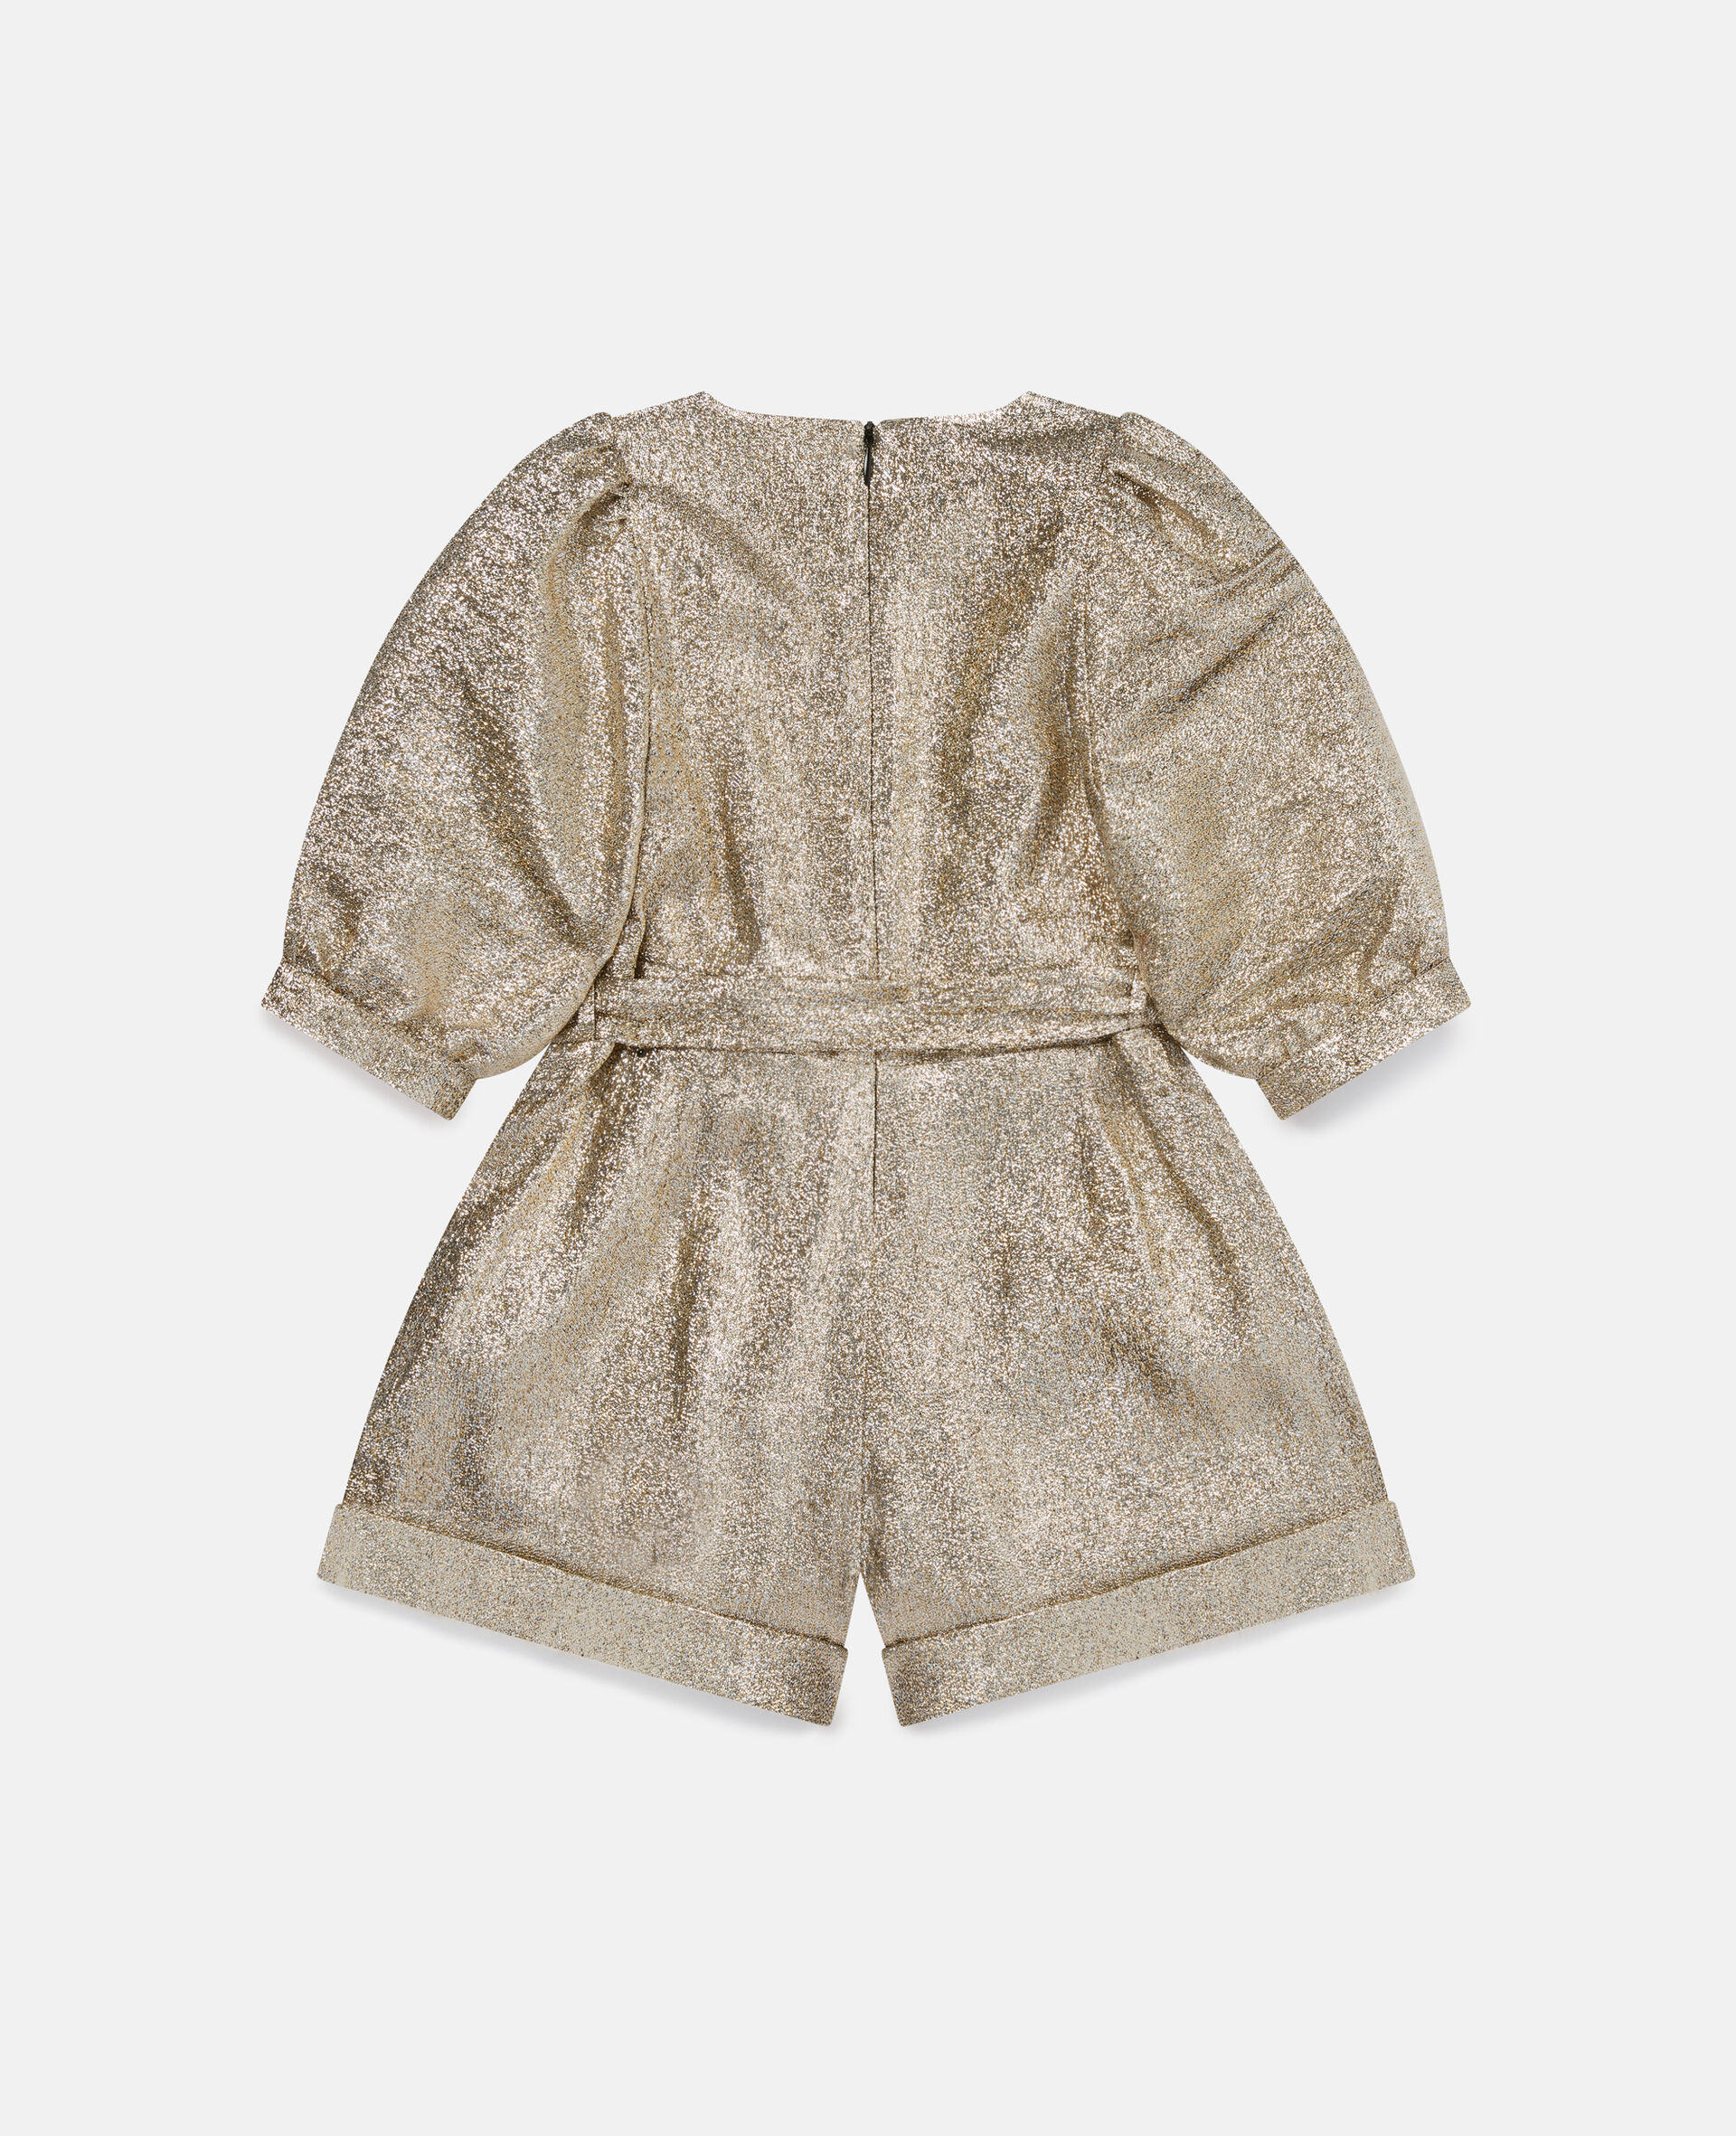 Gold Glitter Playsuit-Yellow-large image number 3